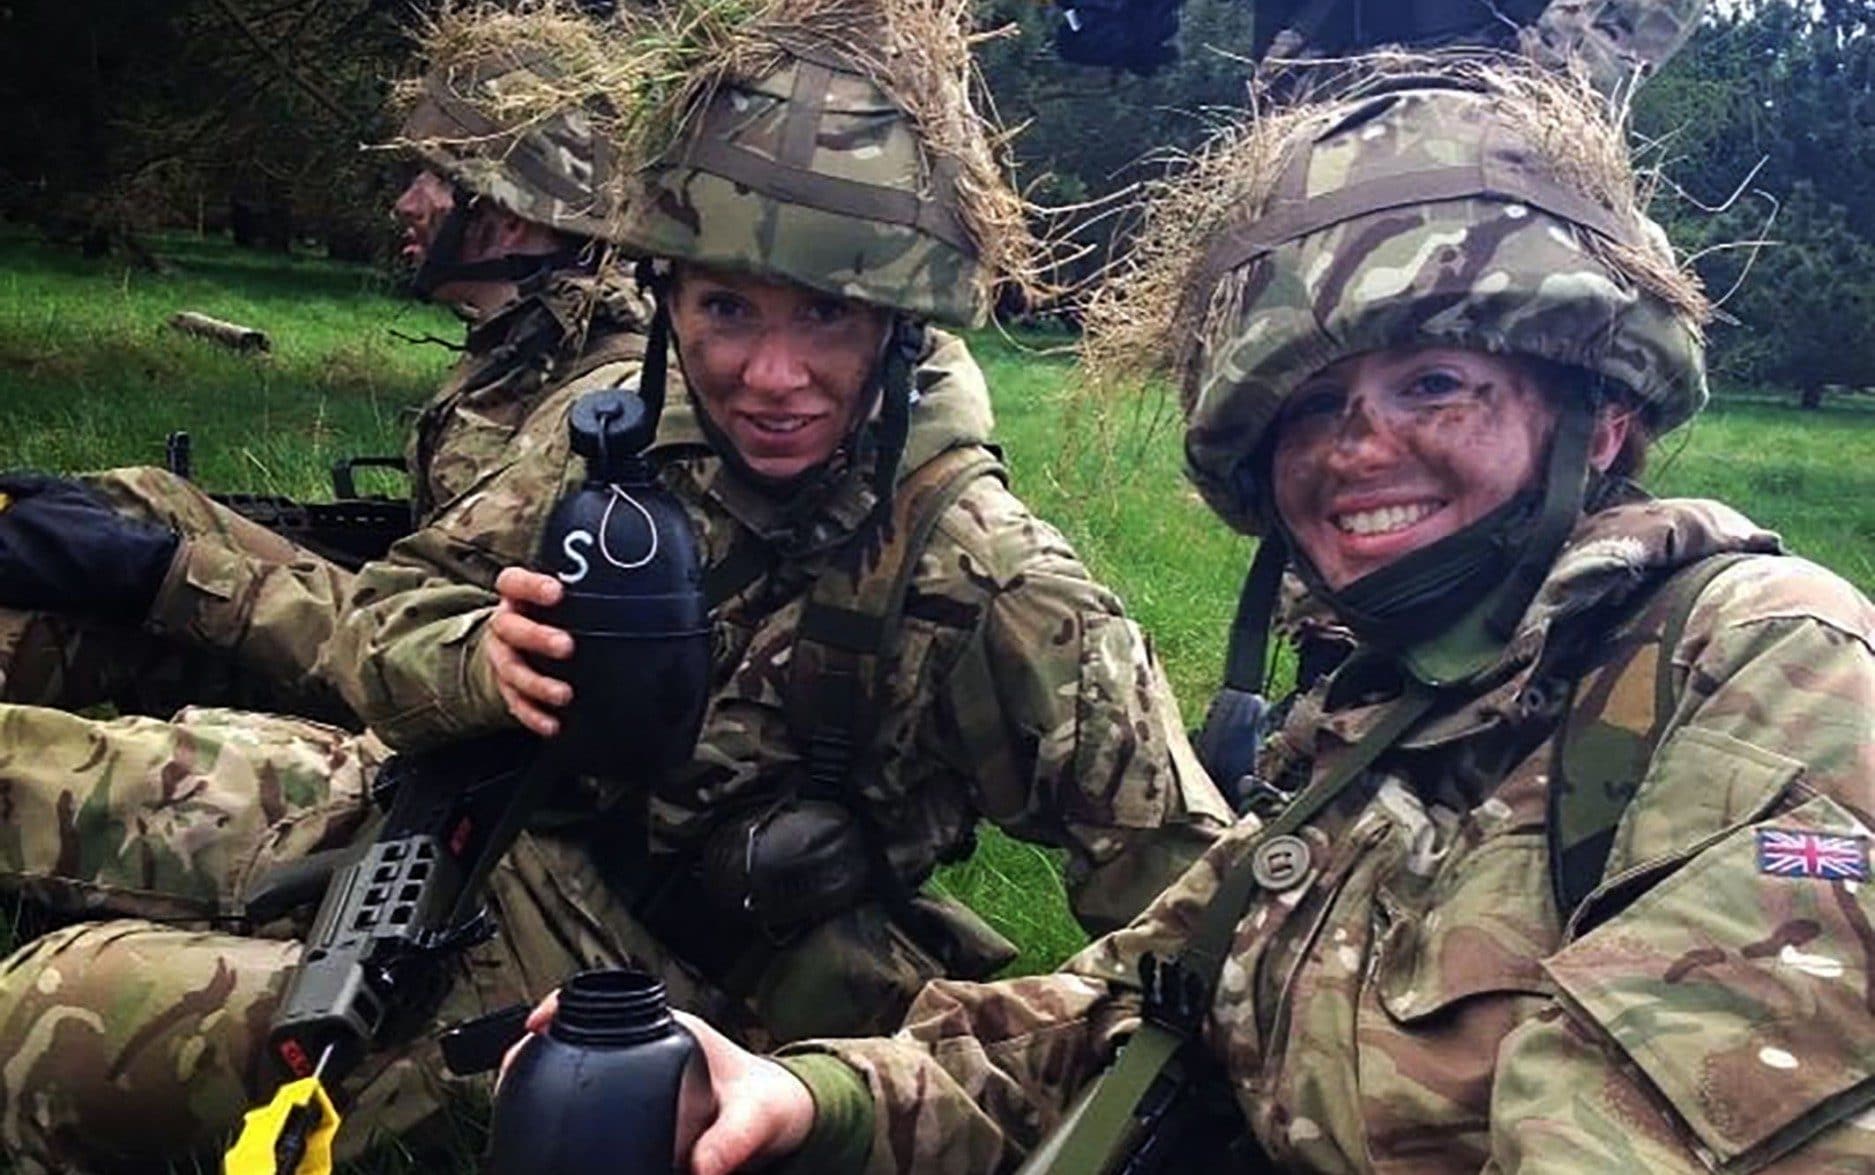 ‘If the new National Service is anything like being in the TA, they’ll have a great time’